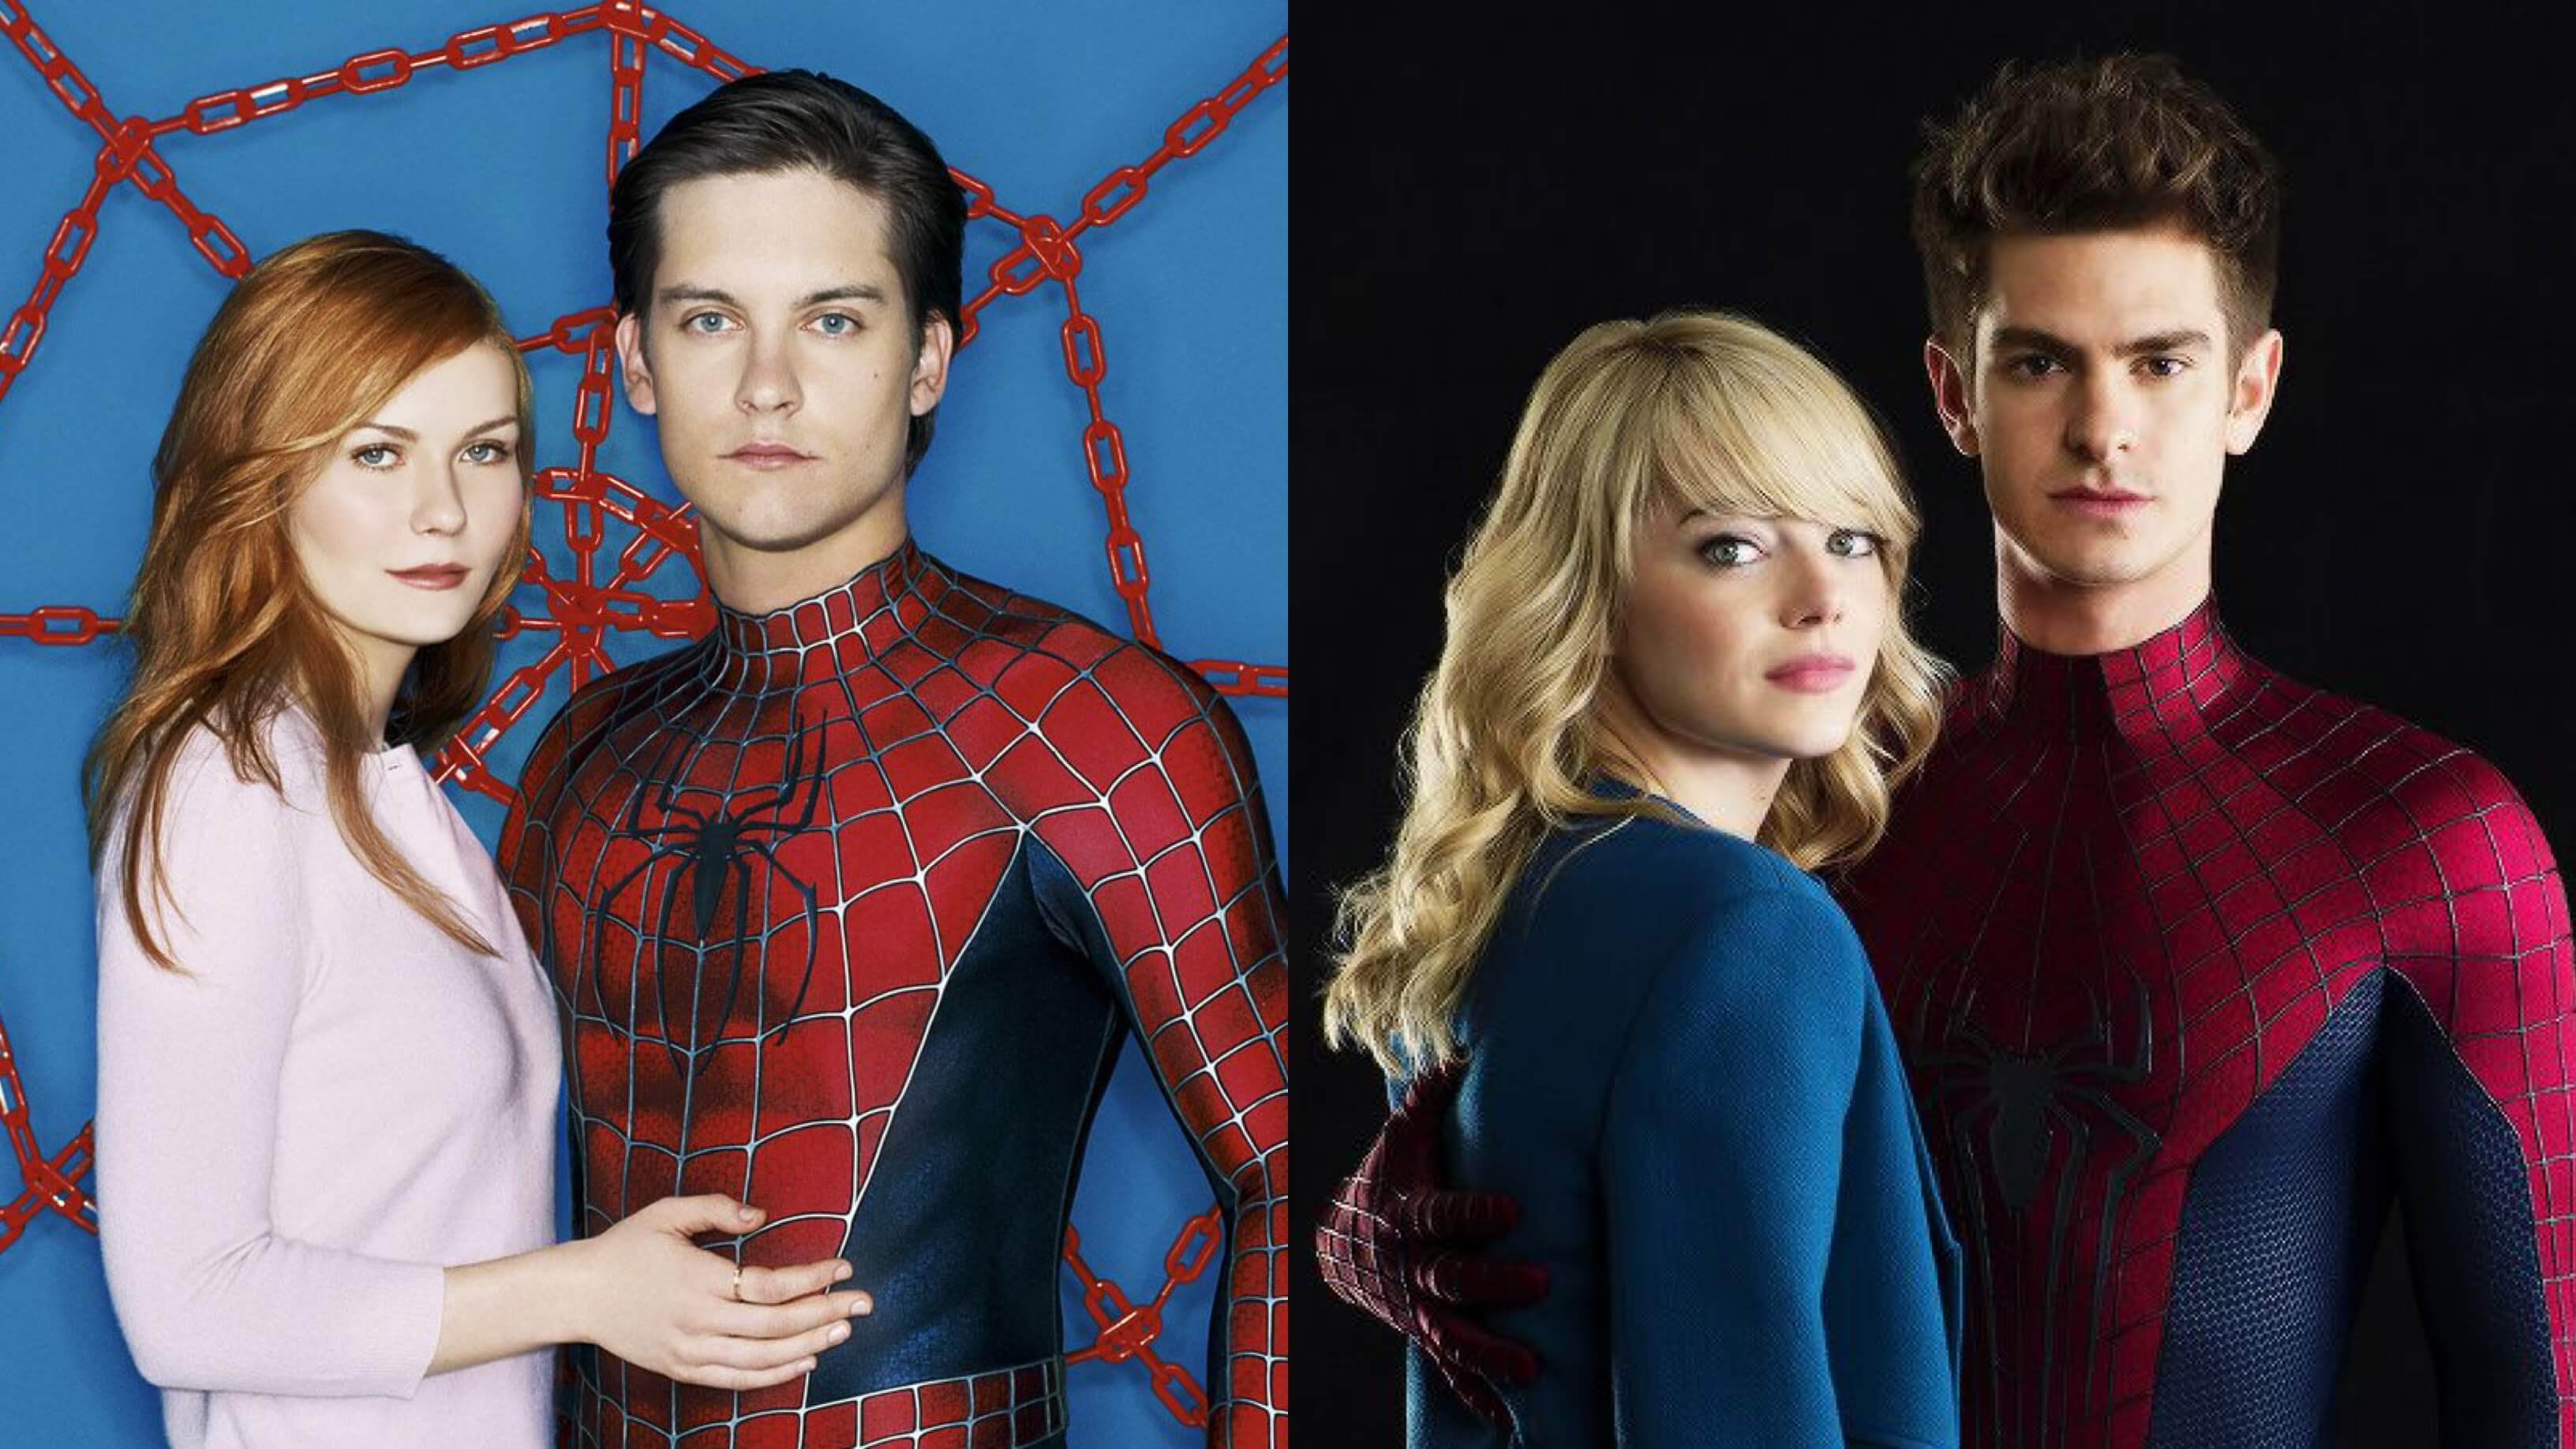 Andrew Garfield And Kirsten Dunst Are Set For 'Spider-Man 3'; Tobey Maguire  And Emma Stone Rumored - The DisInsider